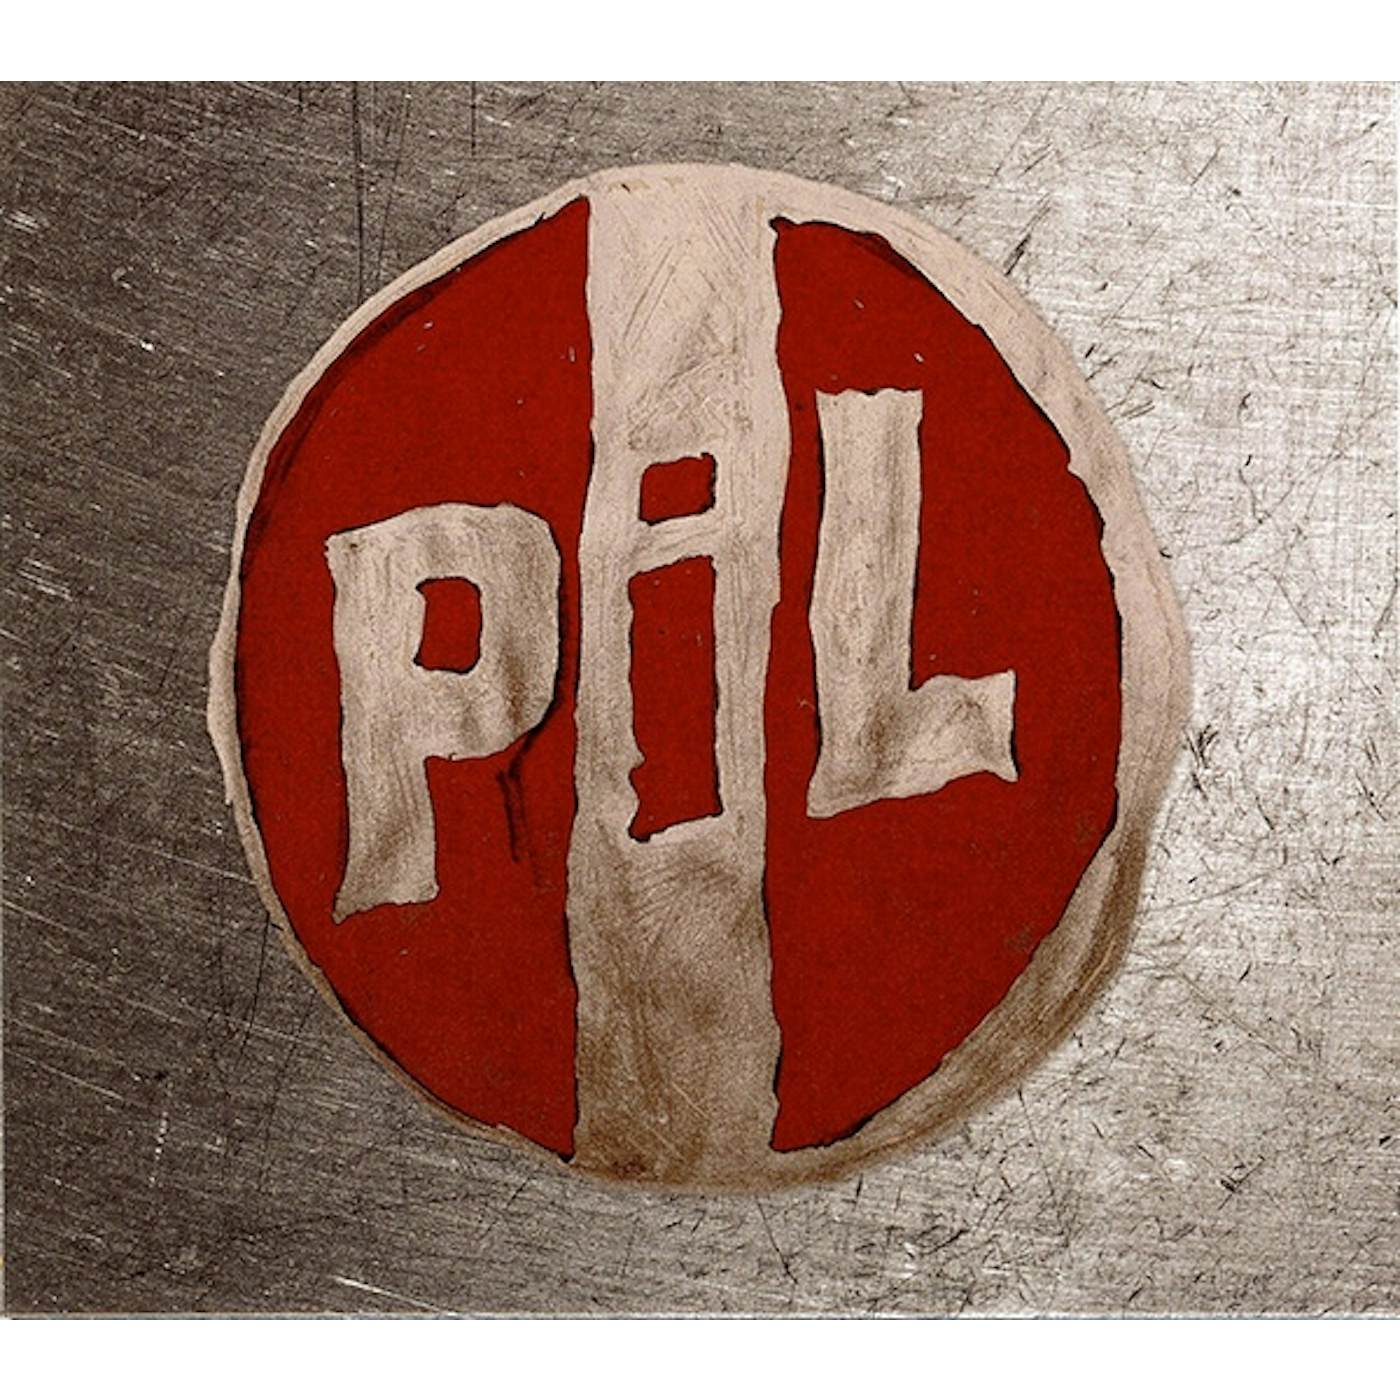 Public Image Ltd. Out of The Woods / Reggie Song Vinyl Record